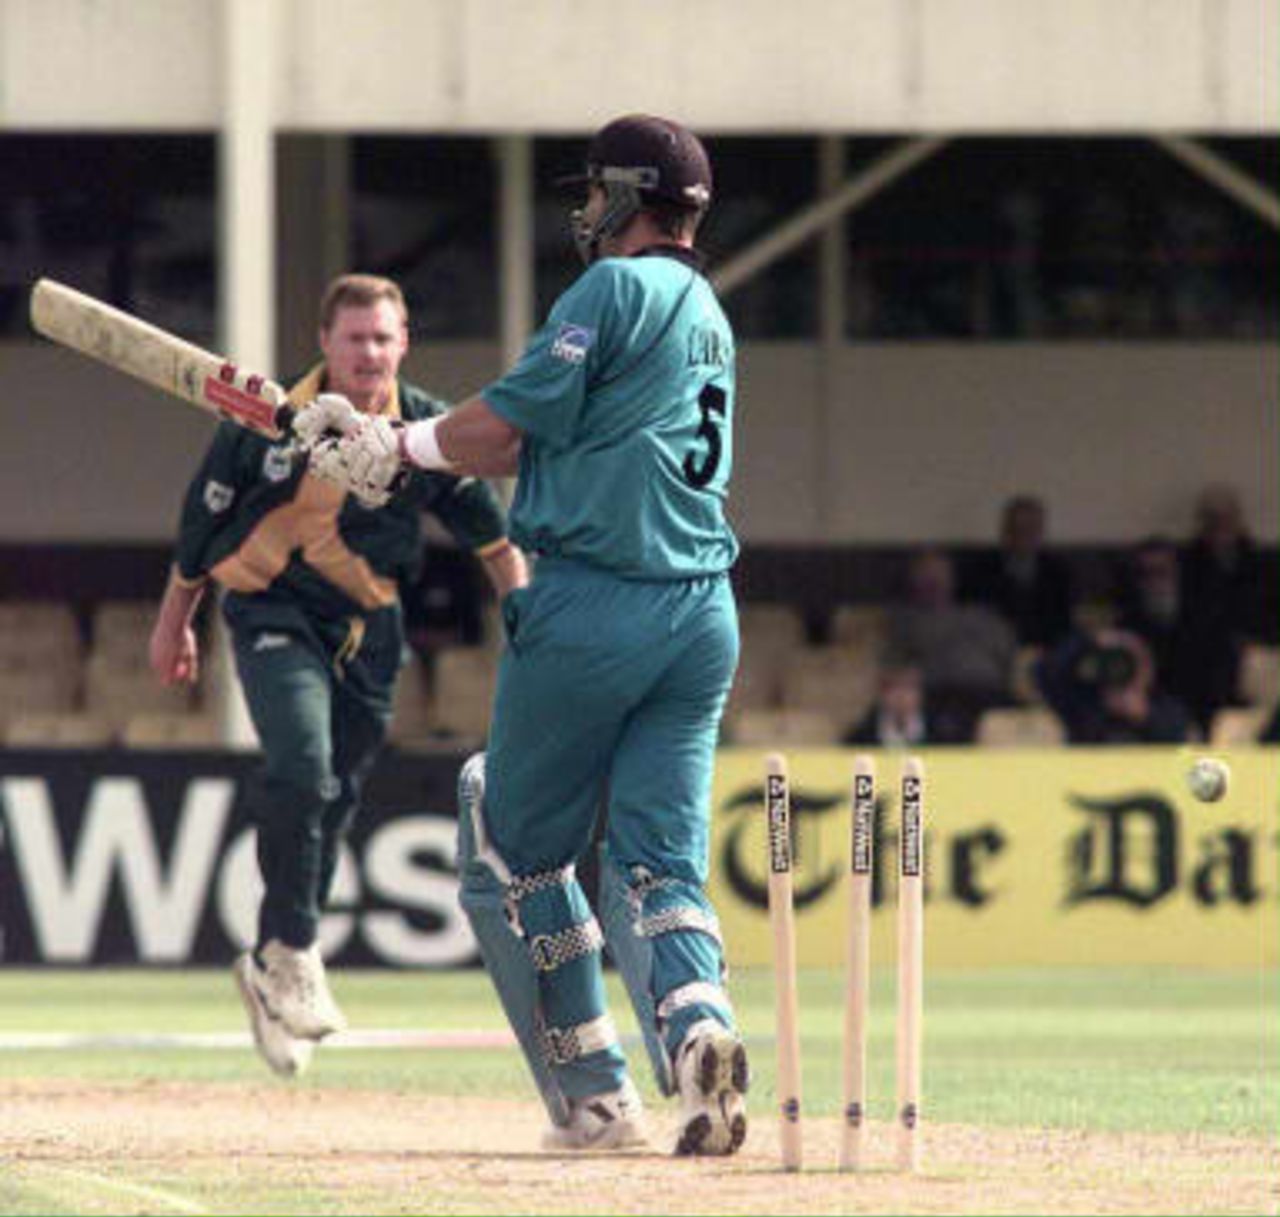 New Zealand Chris Cairns is bowled by Lance Klusener (background) of South Africa during the Cricket World Cup Super Six match at Edgbaston, Birmingham 10 June 1999.